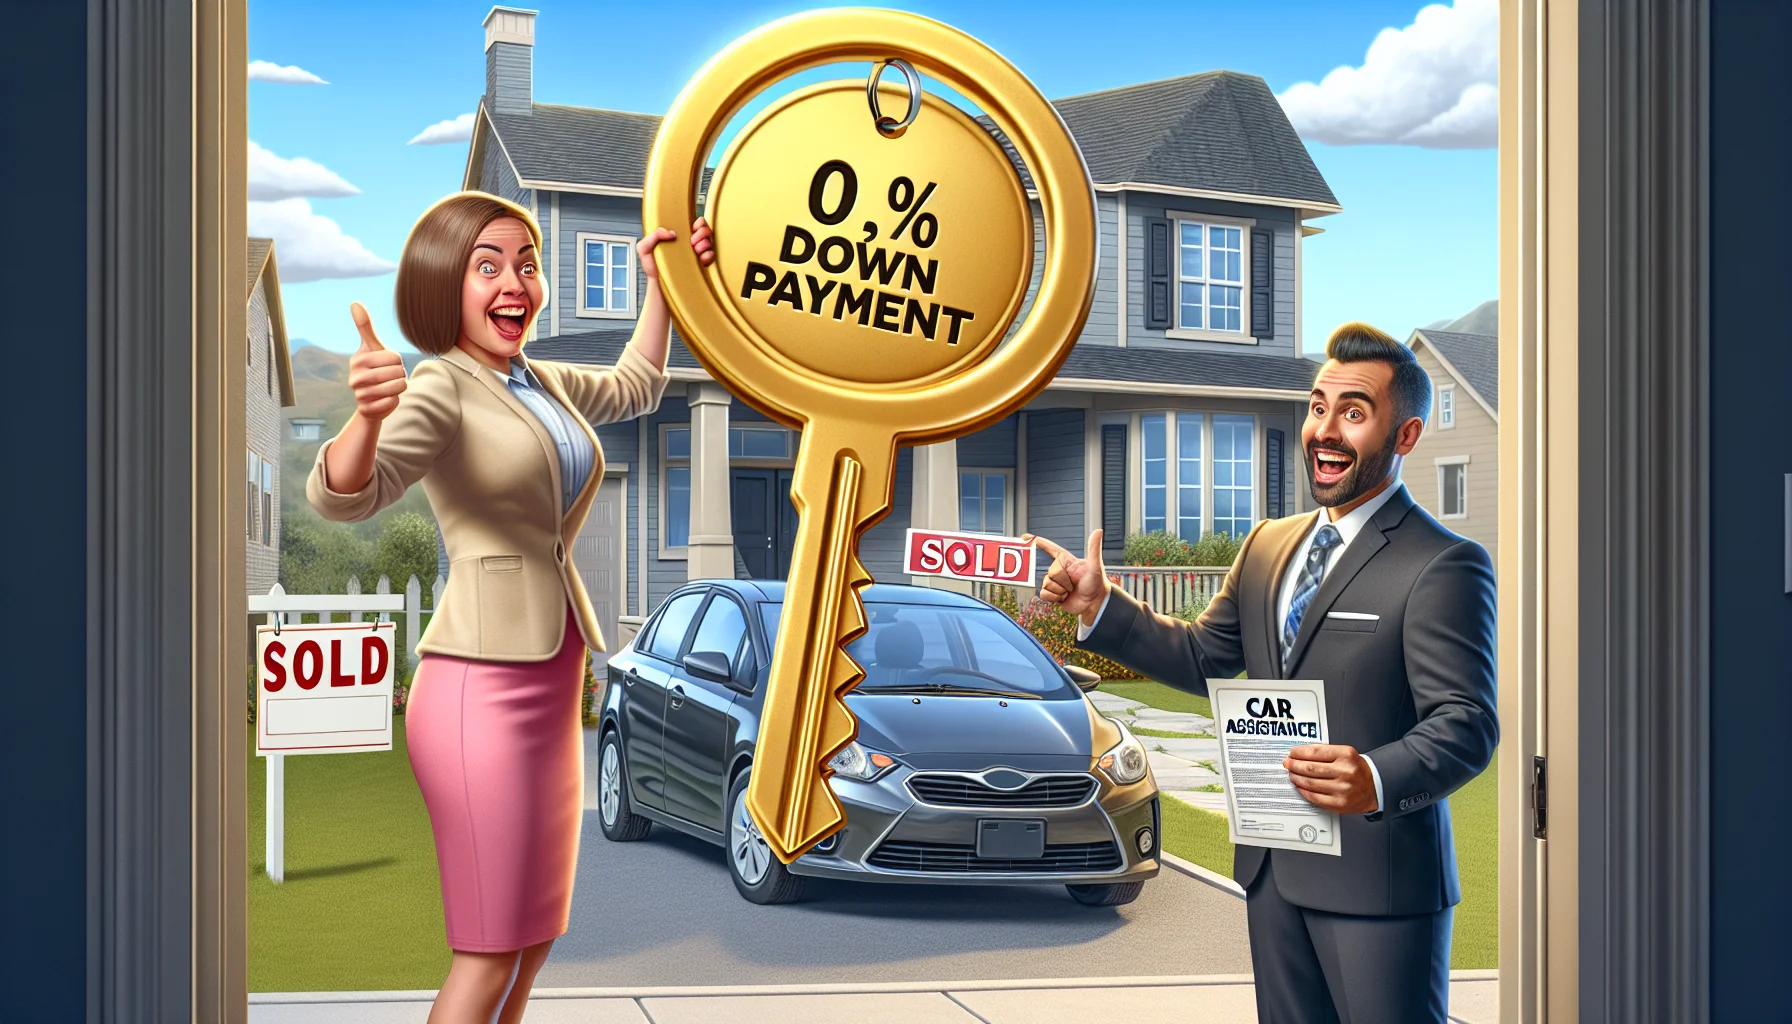 Create a humorous, realistic scene illustrating the best-case scenario for a down payment car assistance program related to real estate. The image features a jubilant Caucasian woman holding a big, shiny symbolic golden key labeled 'Car Assistance'. She stands in front of a charming new house with a sold sign, and there's a shiny new car in the driveway. A Hispanic real estate agent is pointing towards the car with an enthusiastic expression, showing a contract with clear, big words '0% Down Payment'. In the background, we see a picturesque suburban neighborhood under a clear blue sky.